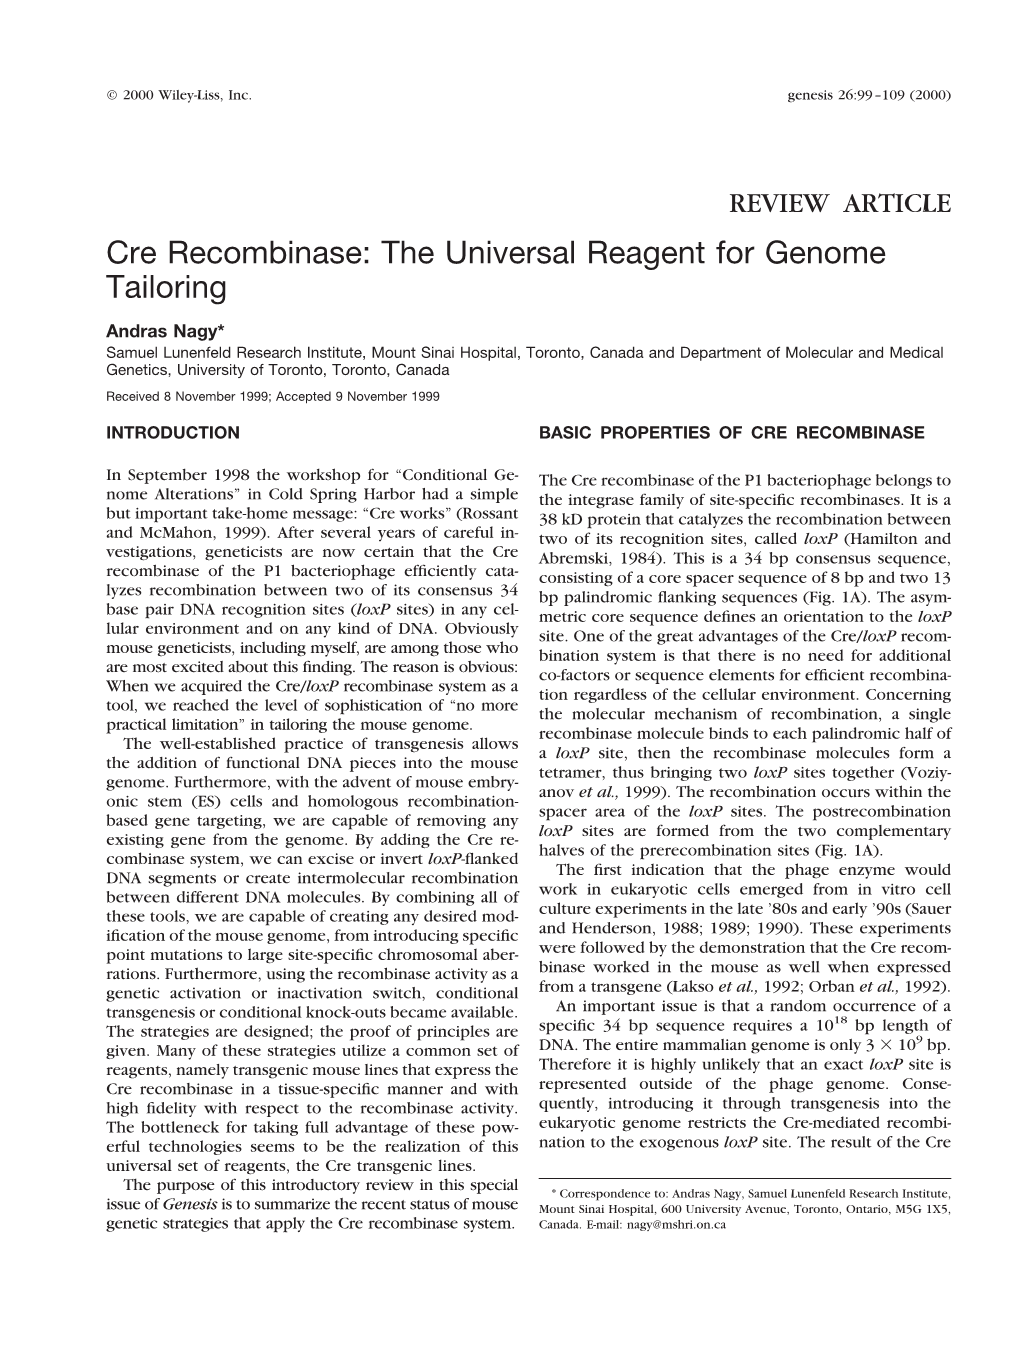 Cre Recombinase: the Universal Reagent for Genome Tailoring